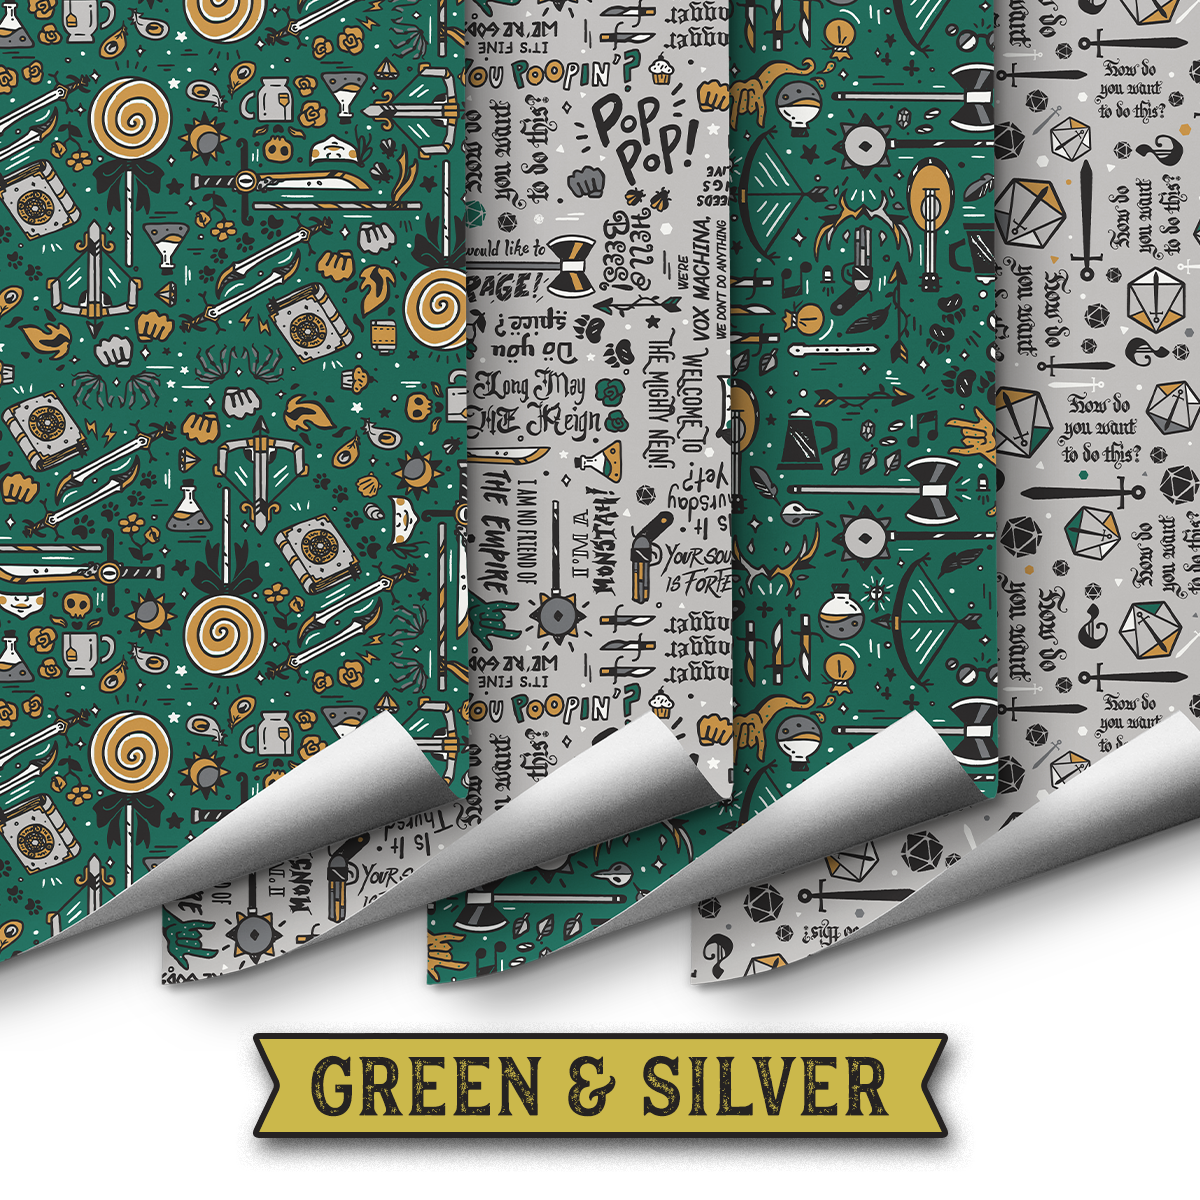 CRITICAL ROLE GREEN & SILVER WRAPPING PAPER